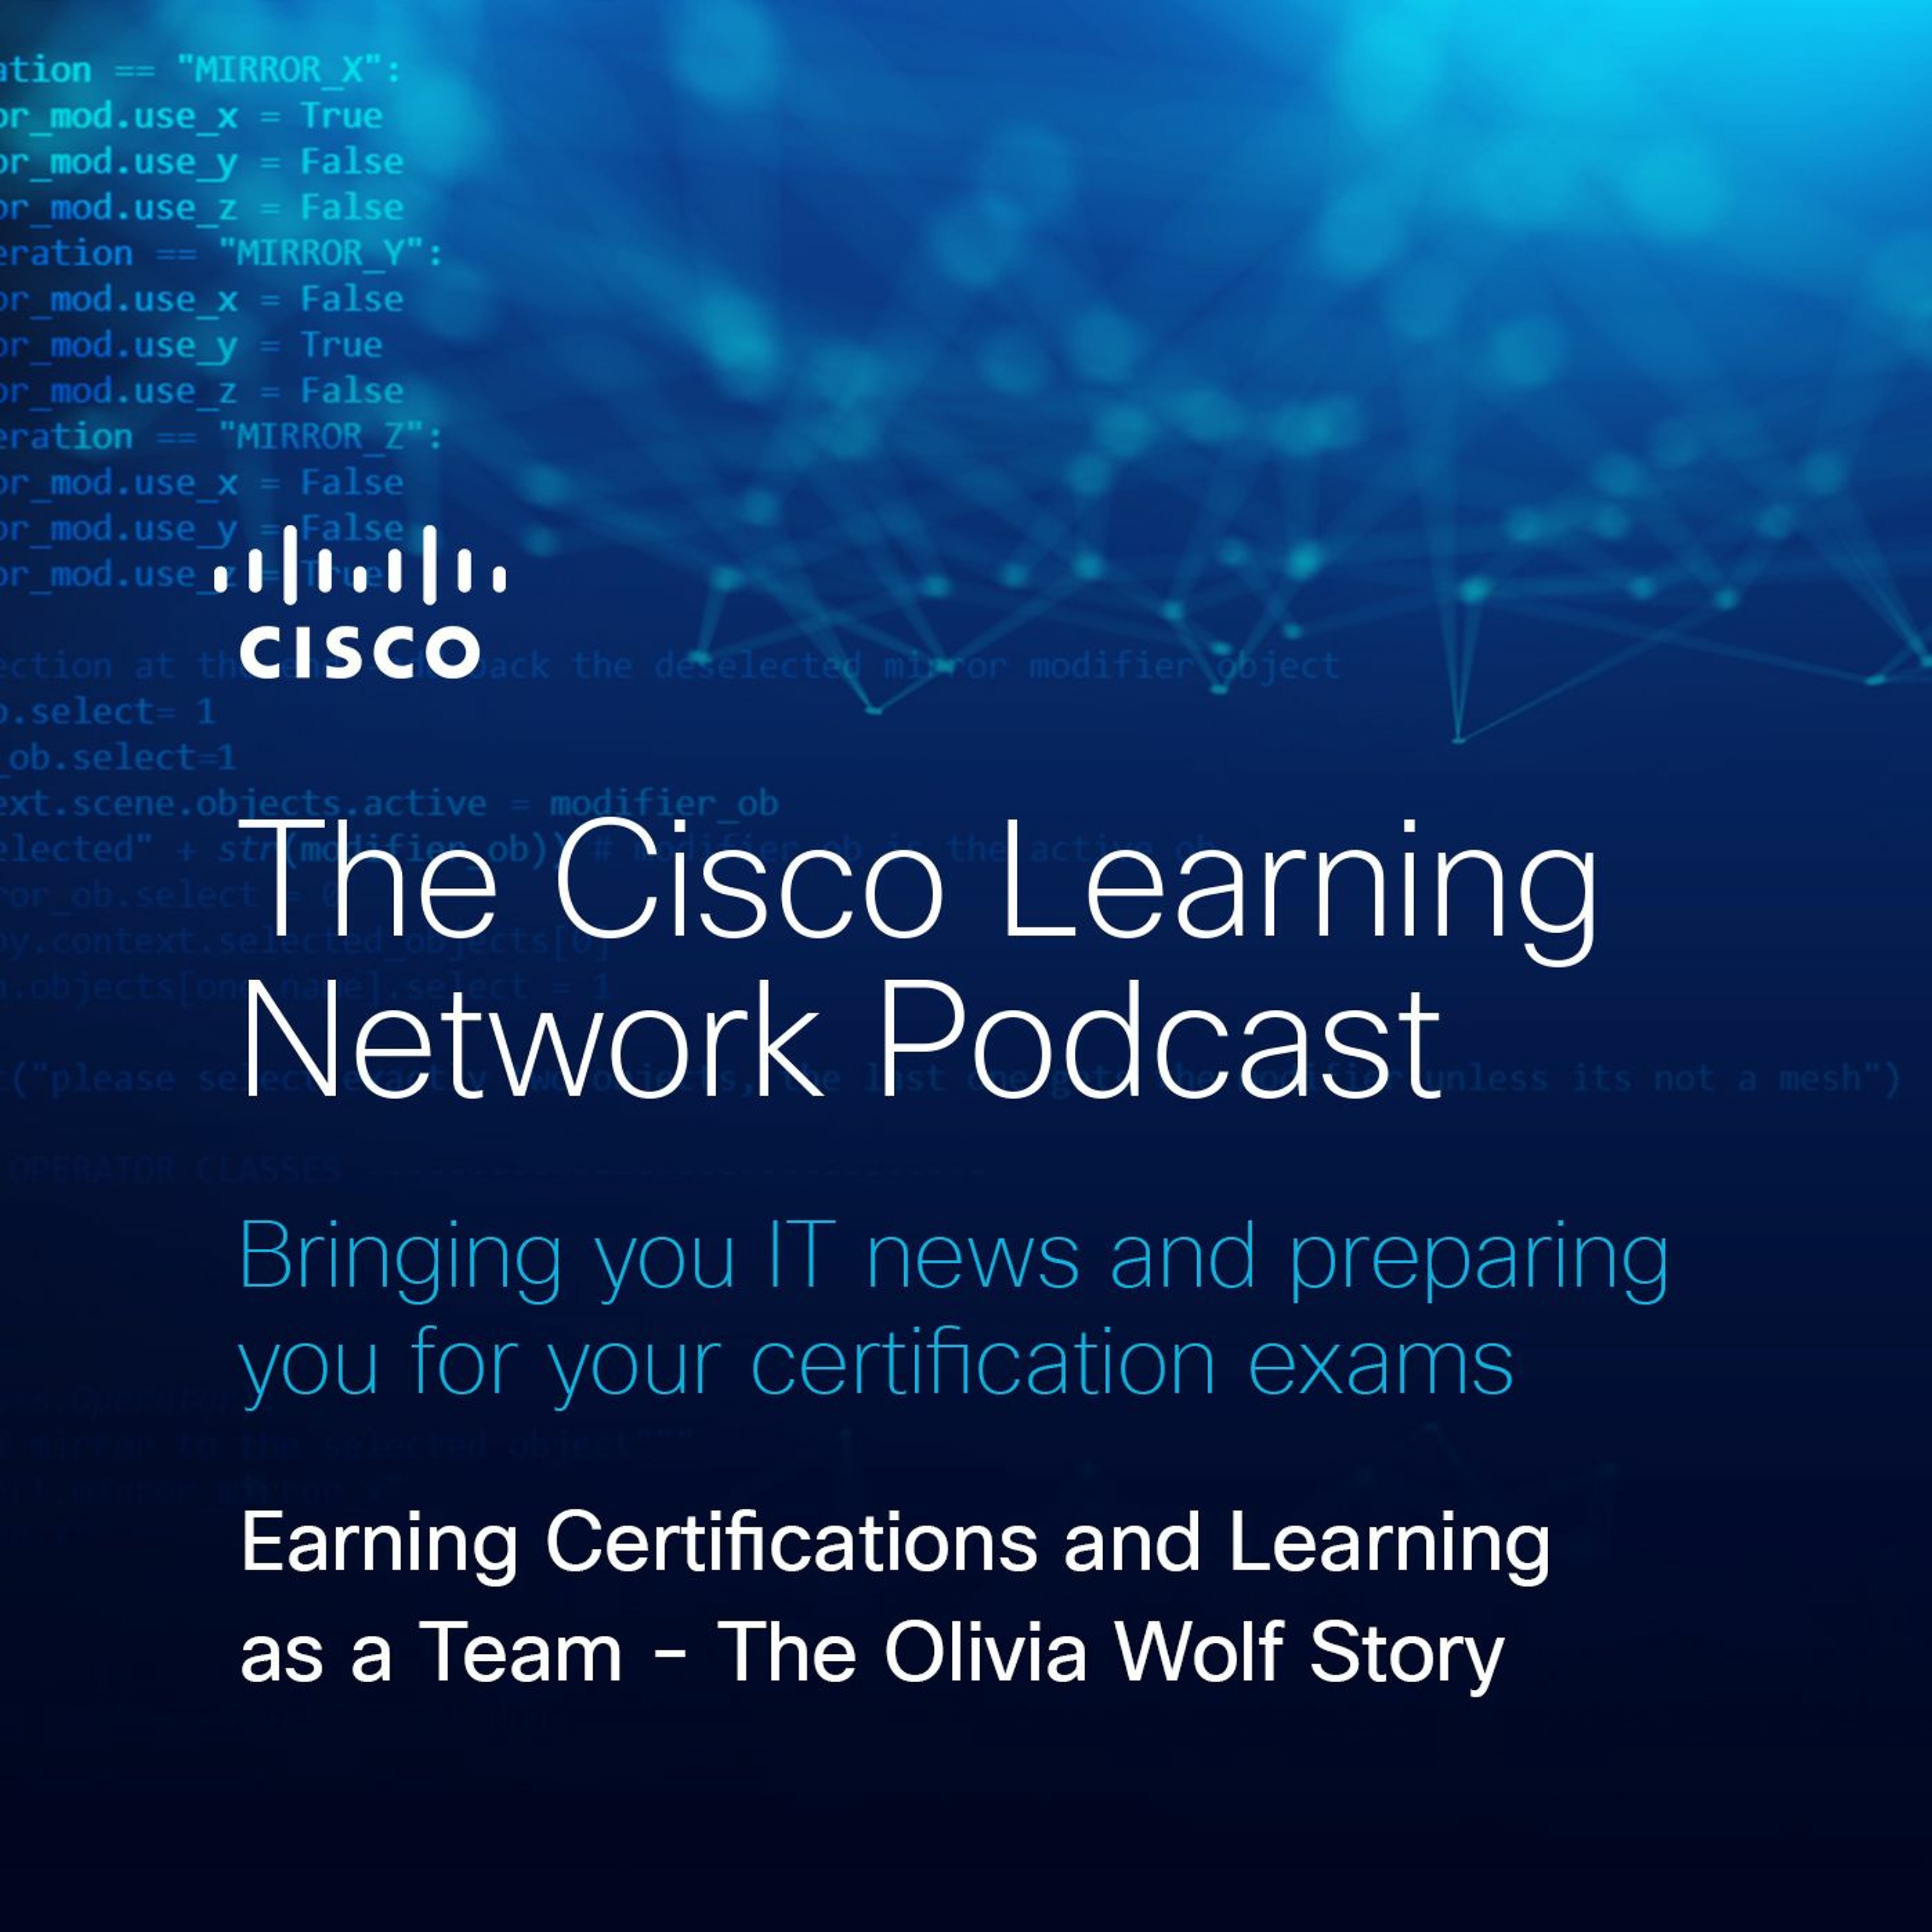 Earning Certifications and Learning as a Team - The Olivia Wolf Story